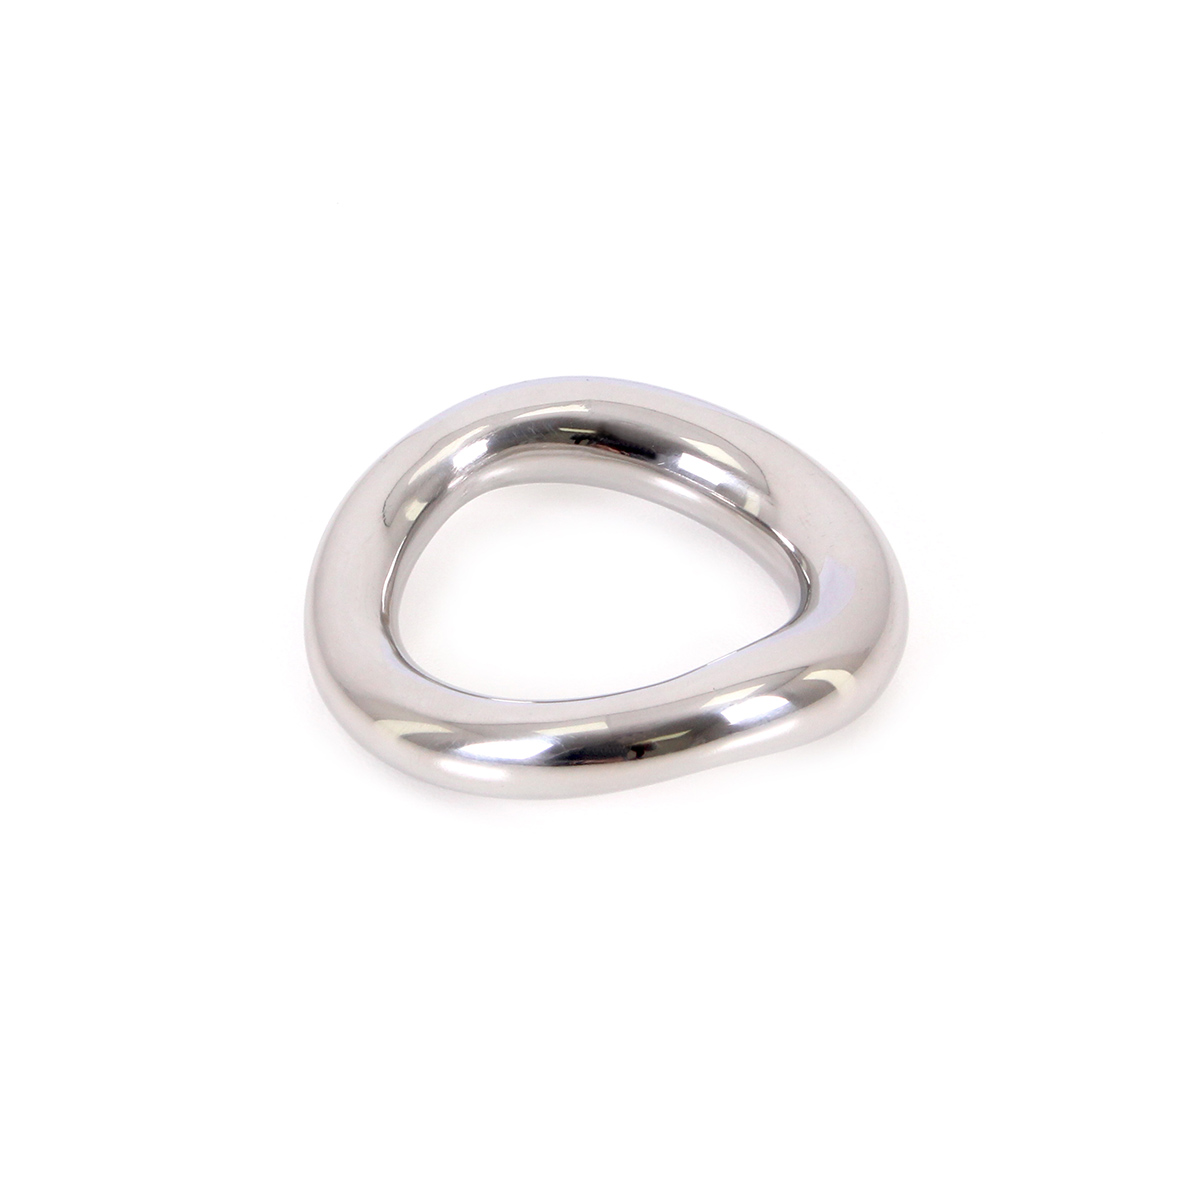 Costum-Fit-Cockring-45-mm-OPR-277045-3